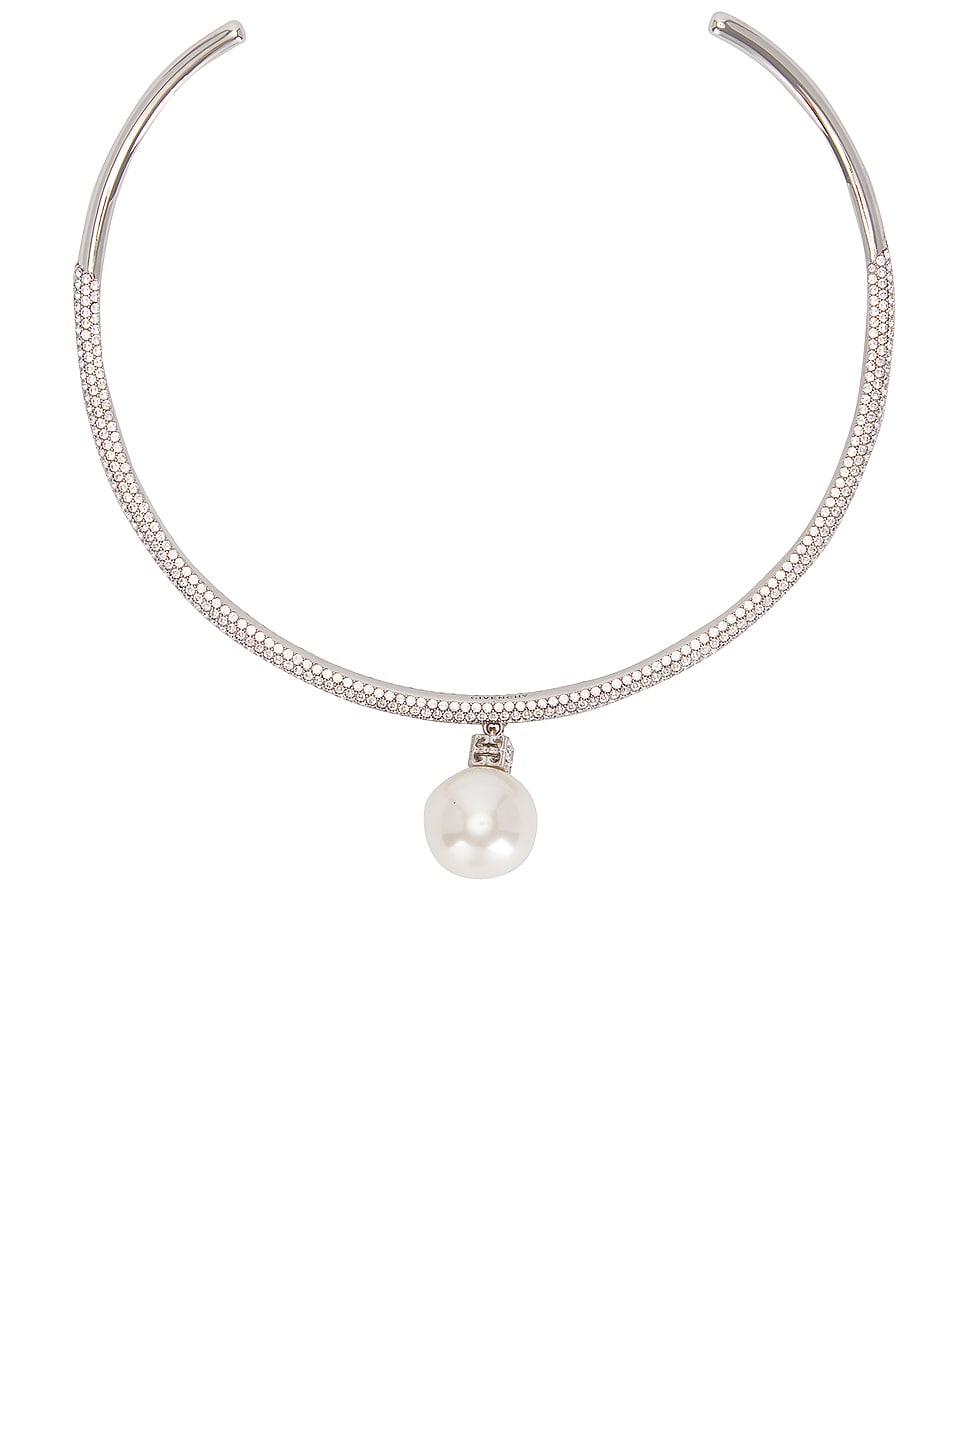 Image 1 of Givenchy Pearl Crystal Necklace in White & Silvery